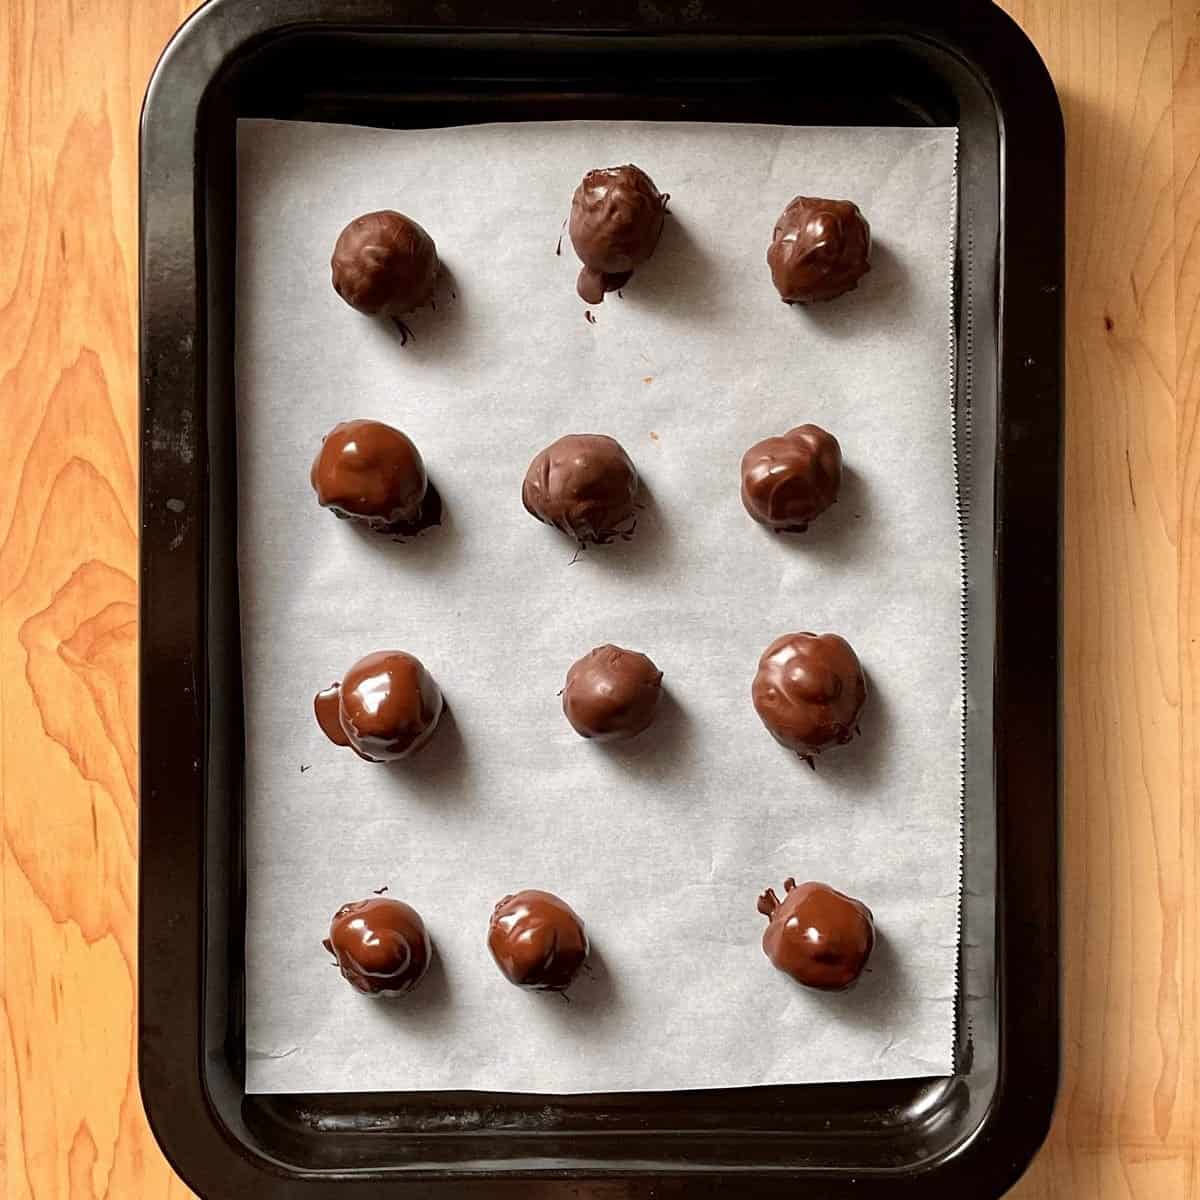 Homemade chocolate hazelnut kisses freshly covered with dark chocolate on a tray.